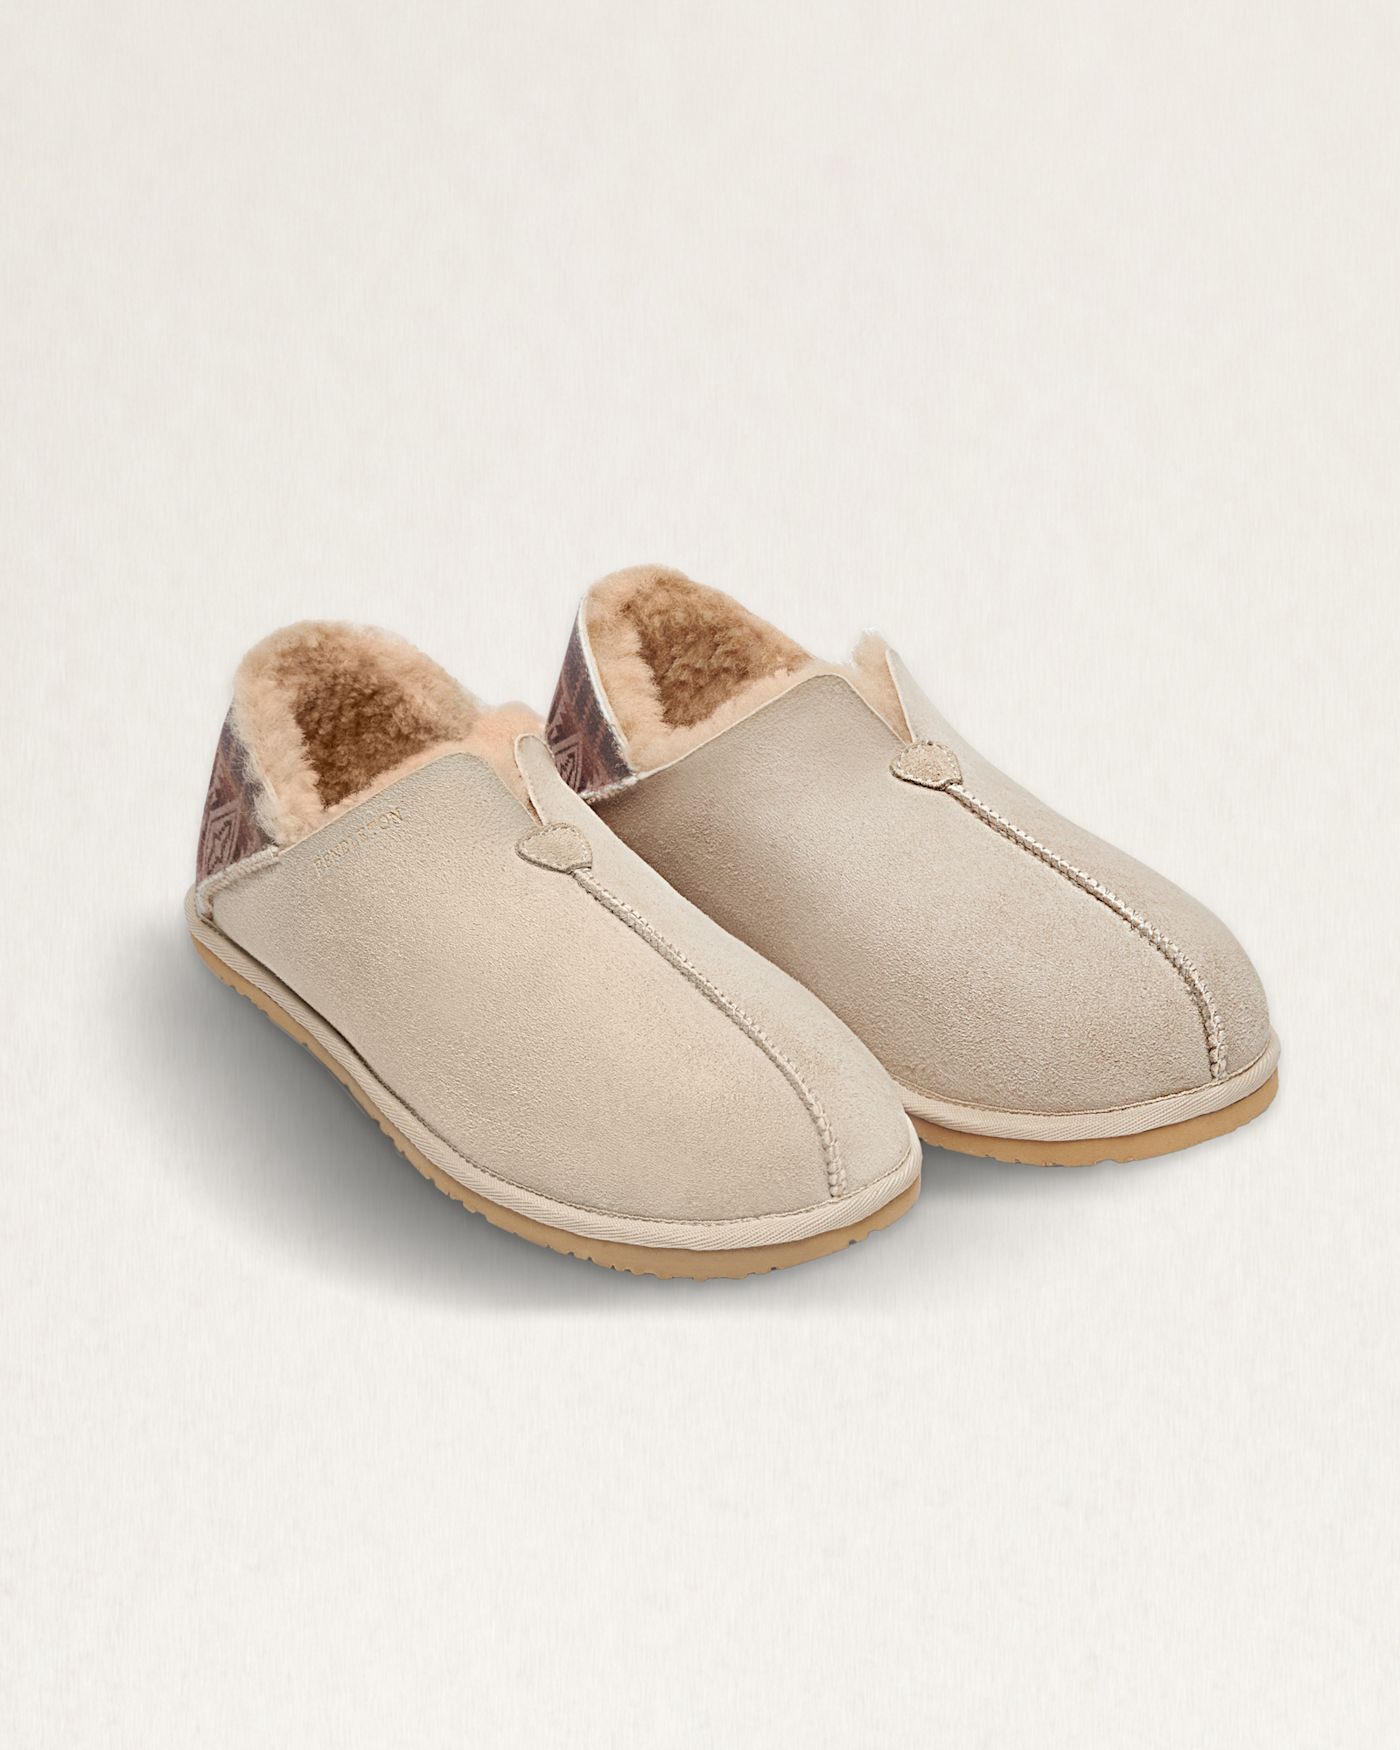 MEN'S COUCH CRUISER SLIPPERS